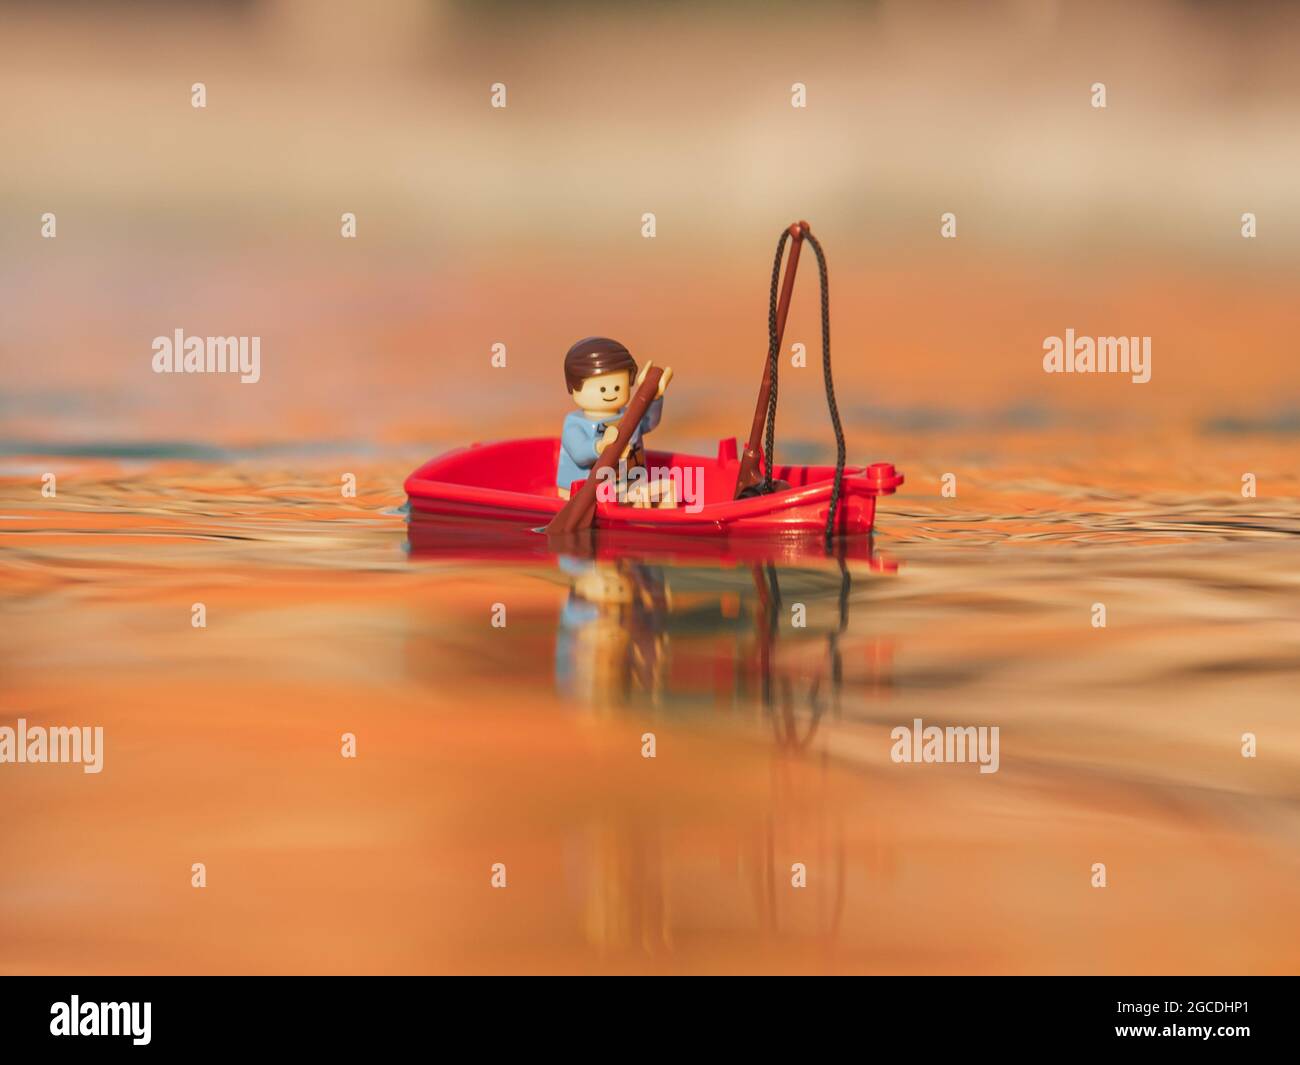 Lego minifigure swimming on red boat Stock Photo